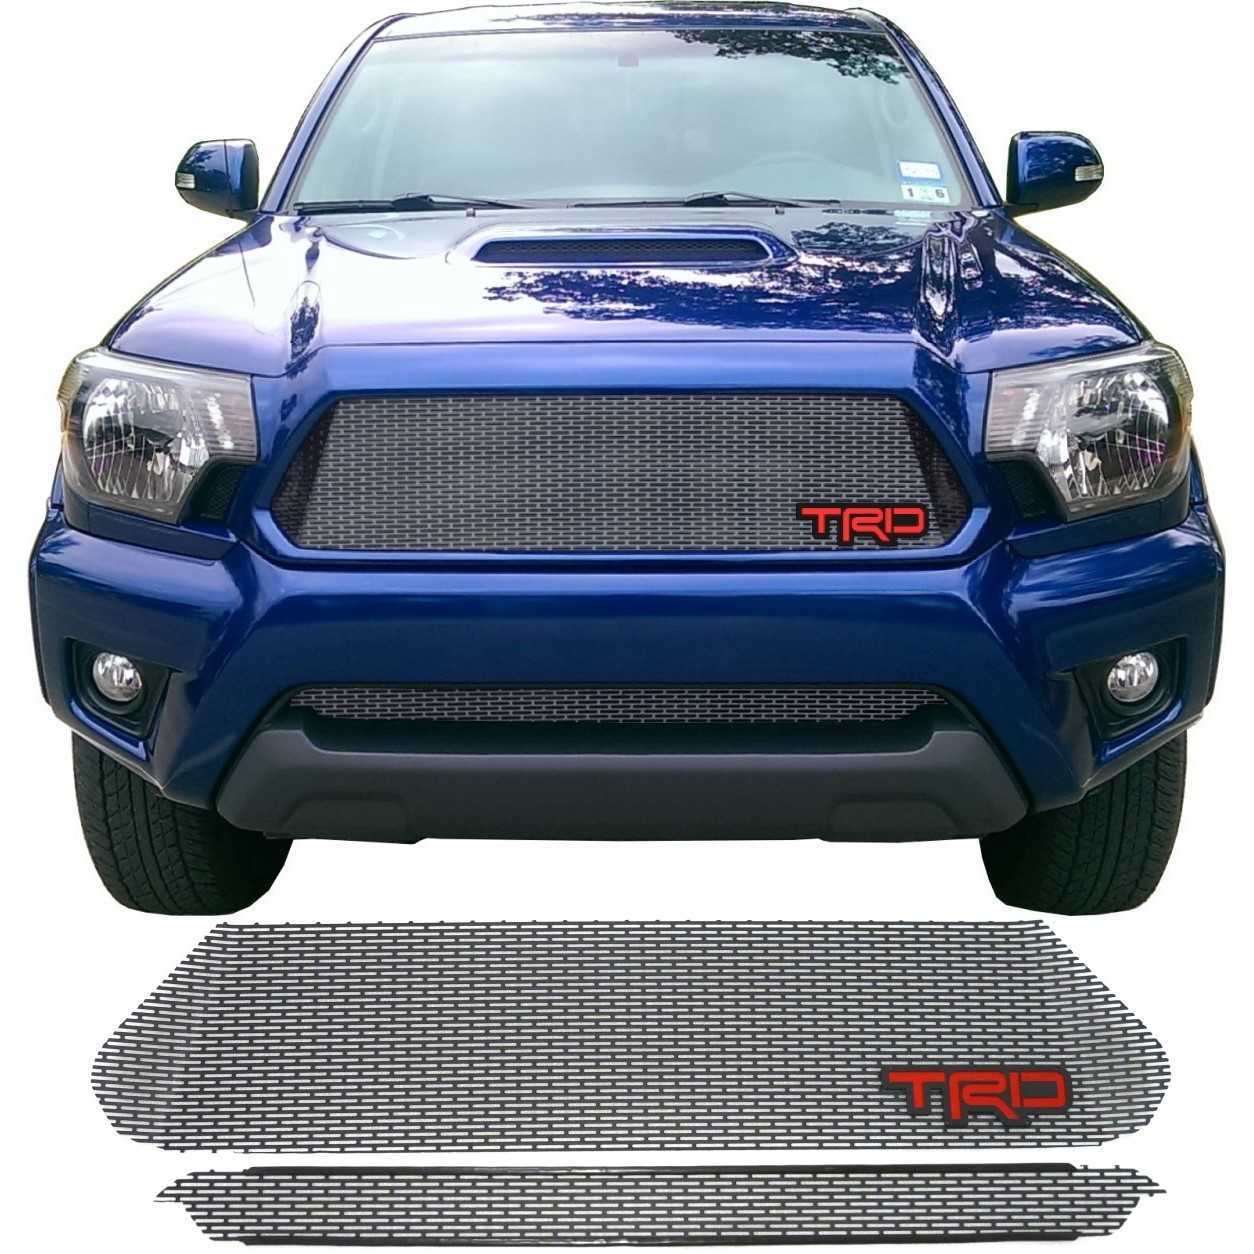 2012-15 Toyota Tacoma Mesh Grill With TRD Emblem by customcargrills